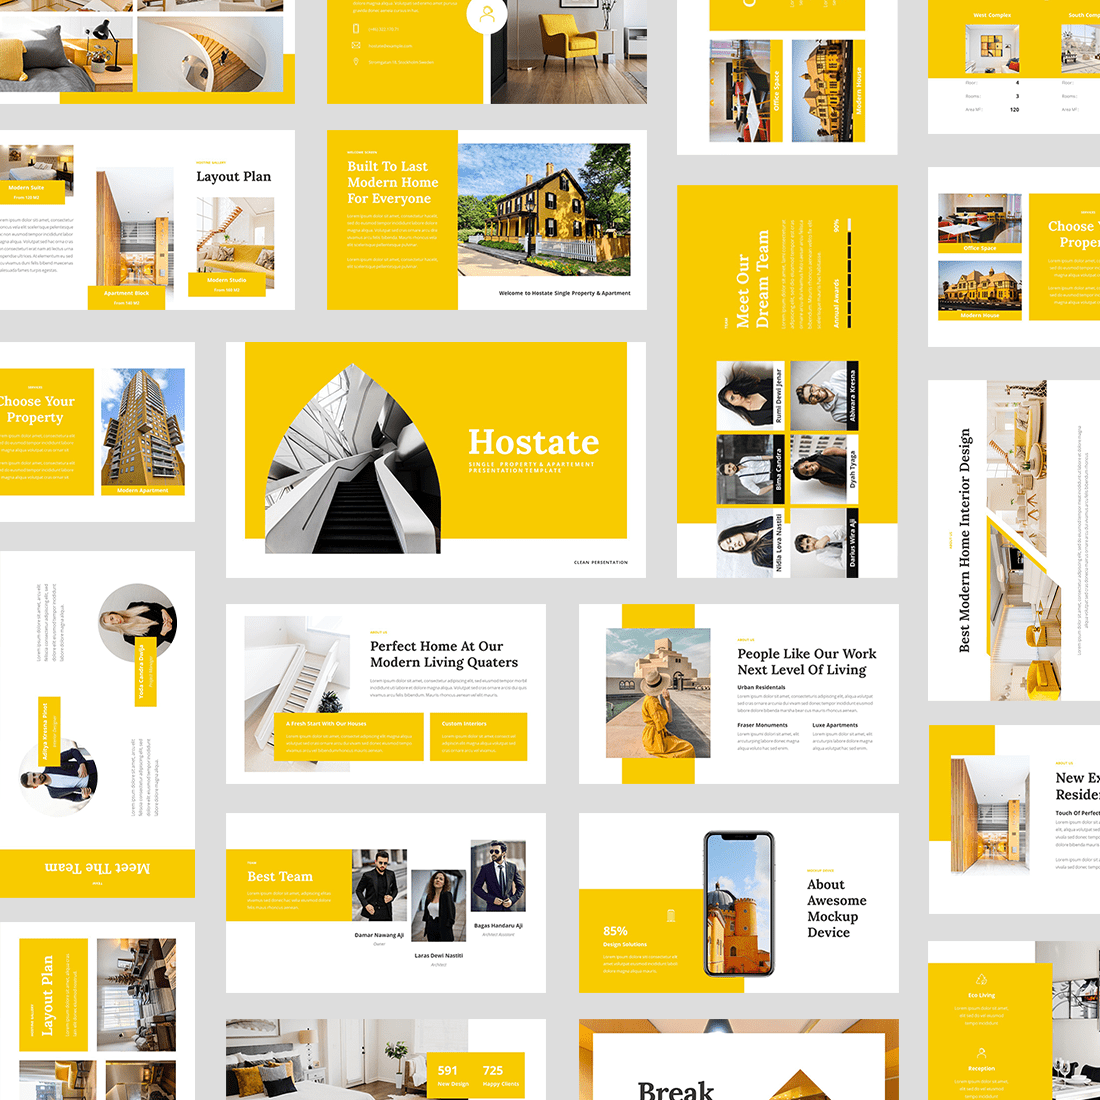 Hostate - Single Property & Apartment PowerPoint Template preview image.